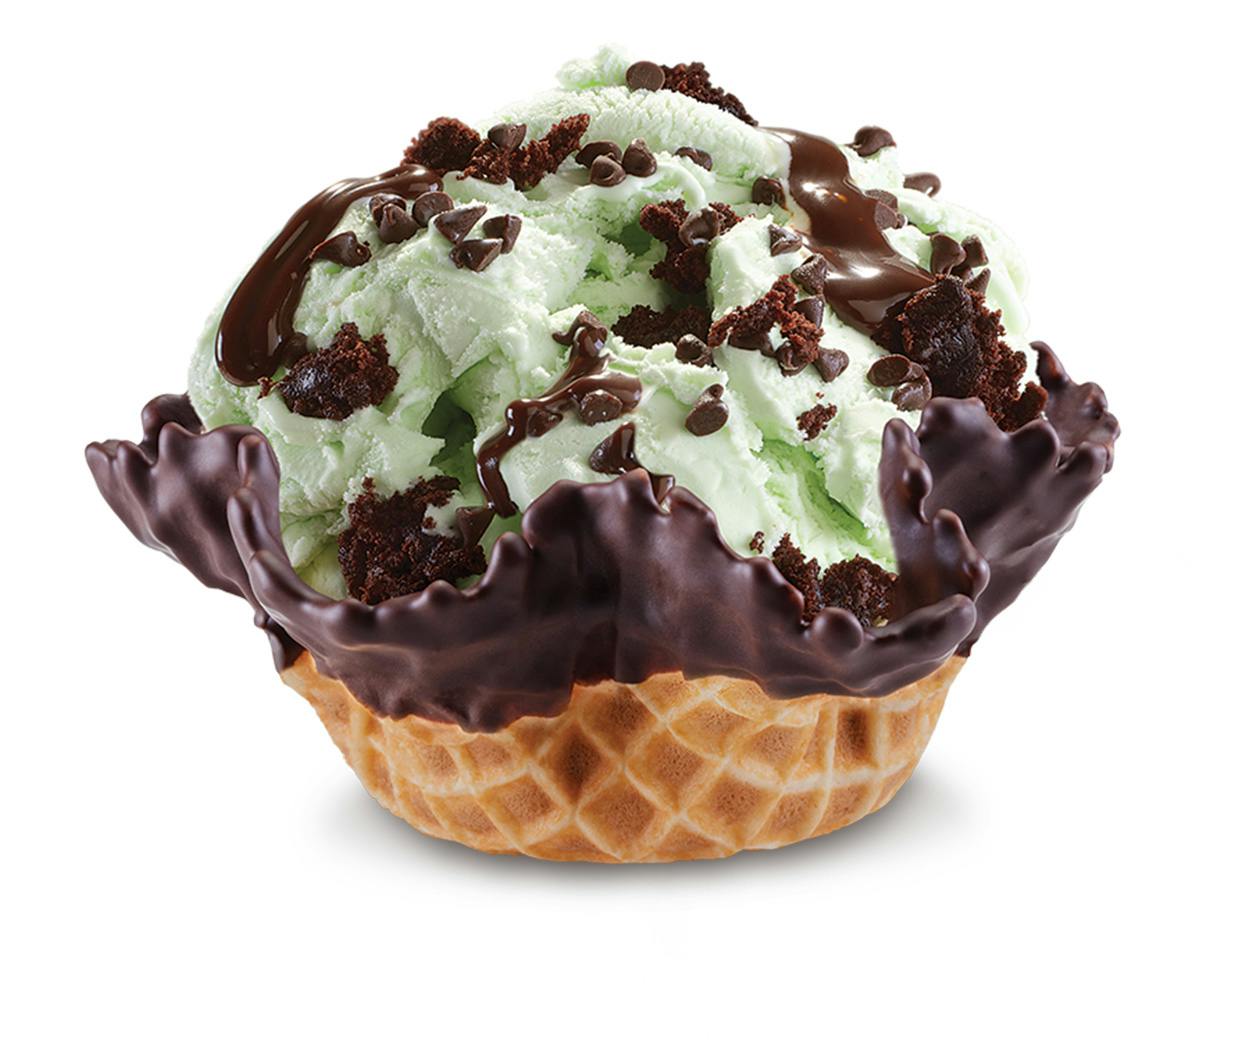 Mint Mint Chocolate Chocolate Chip from Cold Stone Creamery - Lawrence in Lawrence, KS